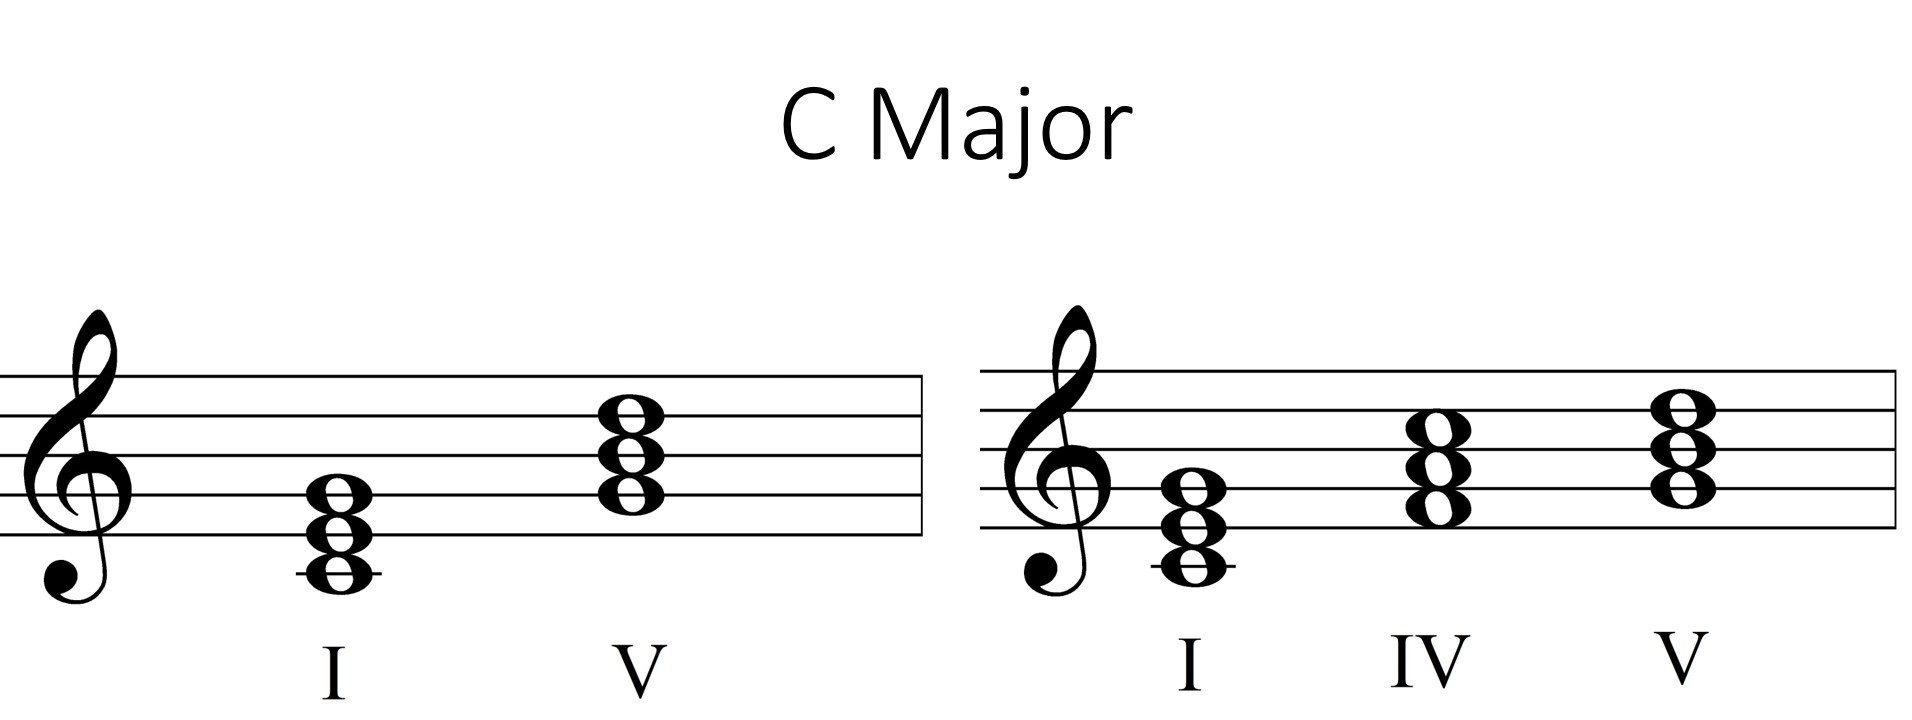 Primary triads in C Major on the staff